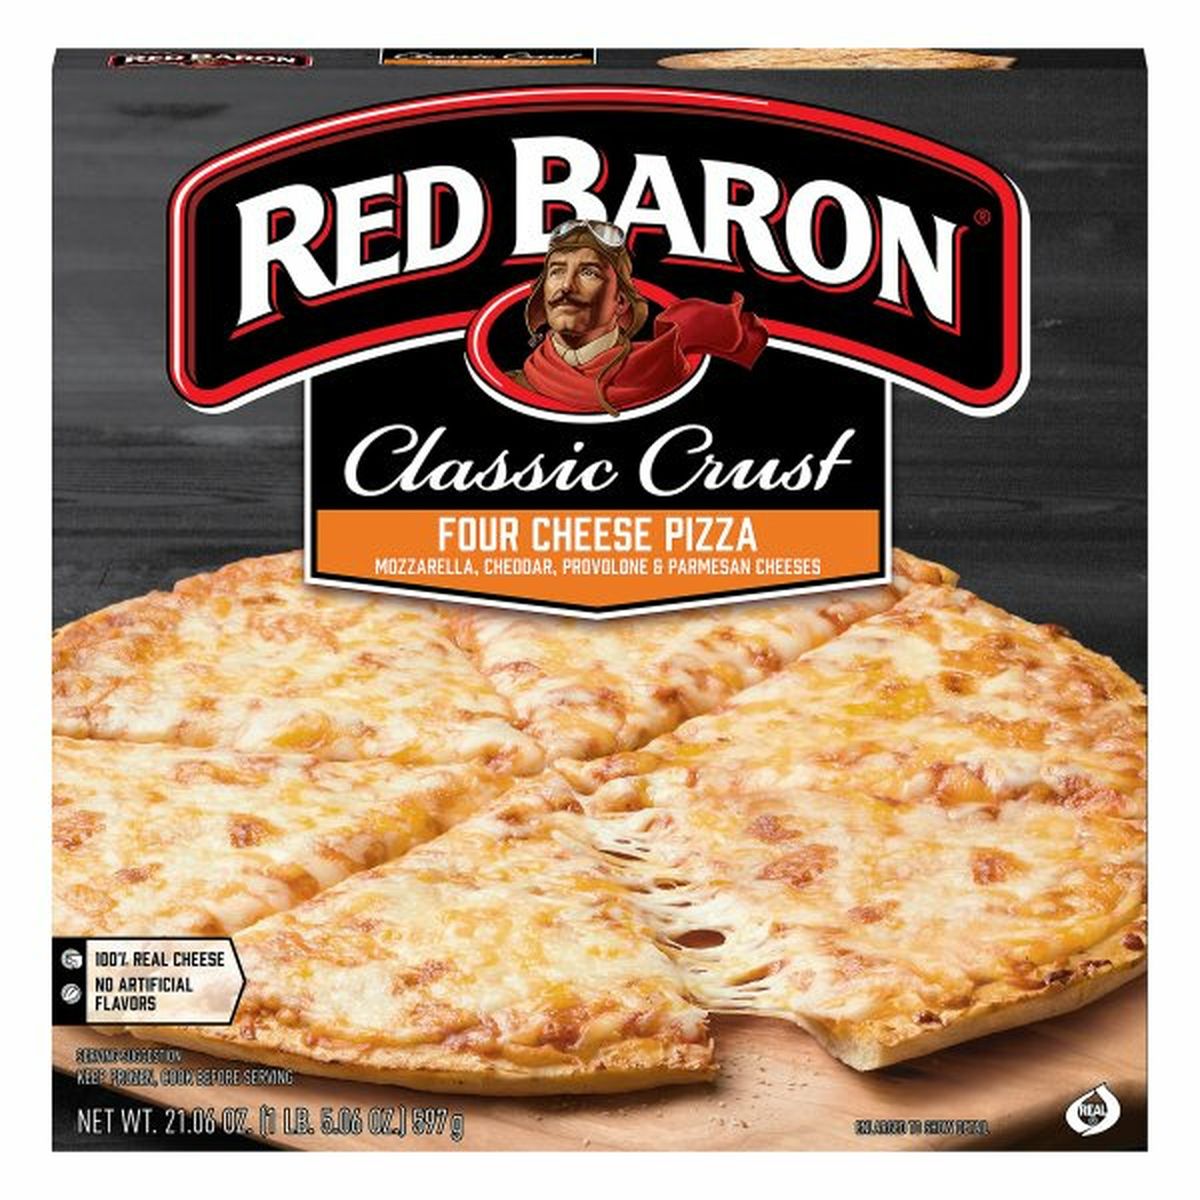 Calories in Red Baron Pizza, Classic Crust, Four Cheese